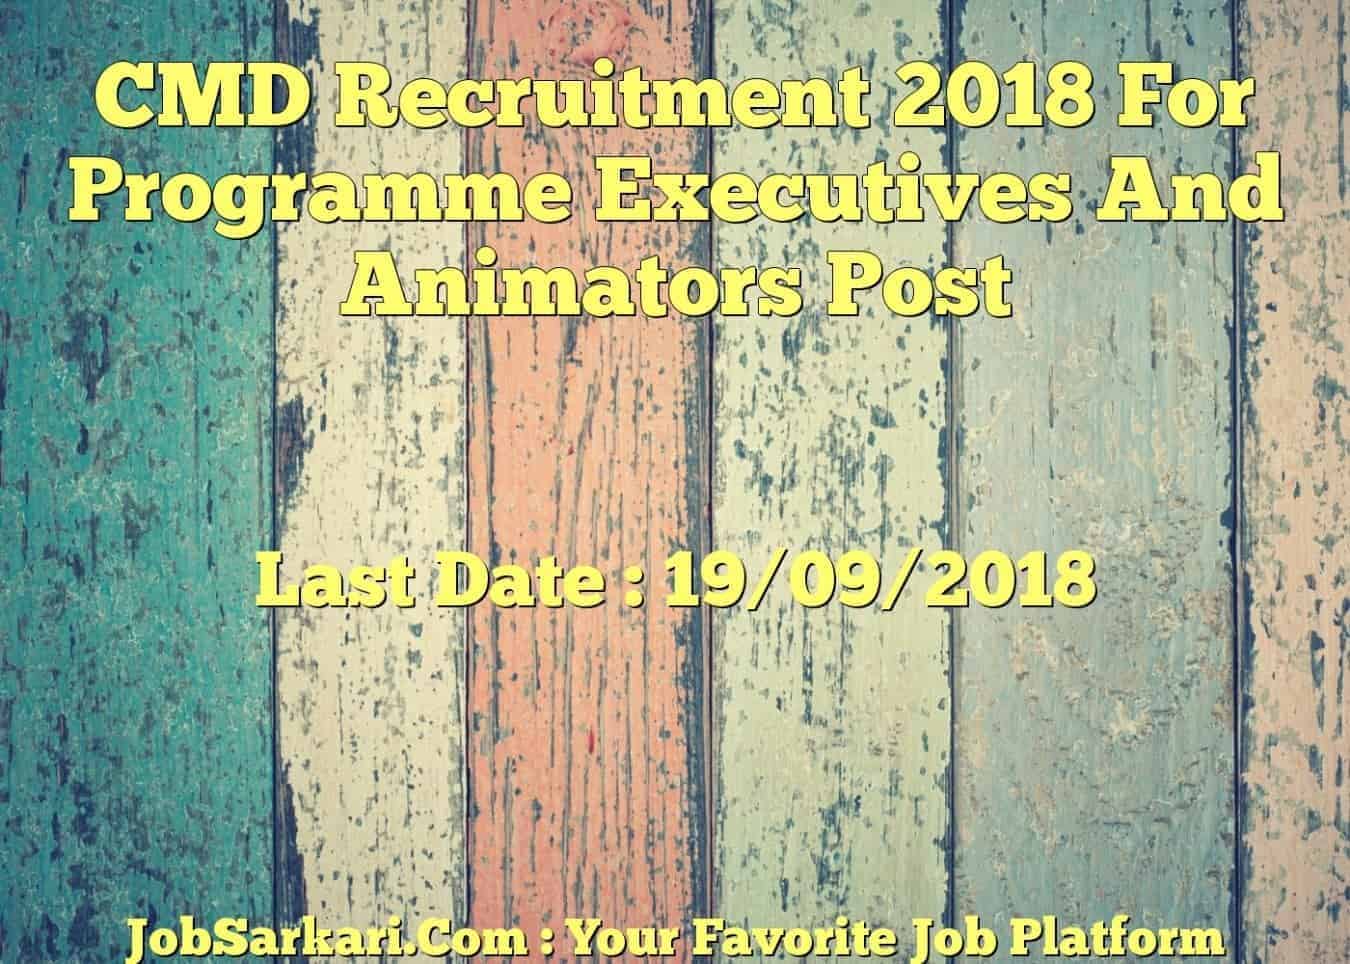 CMD Recruitment 2018 For Programme Executives And Animators Post